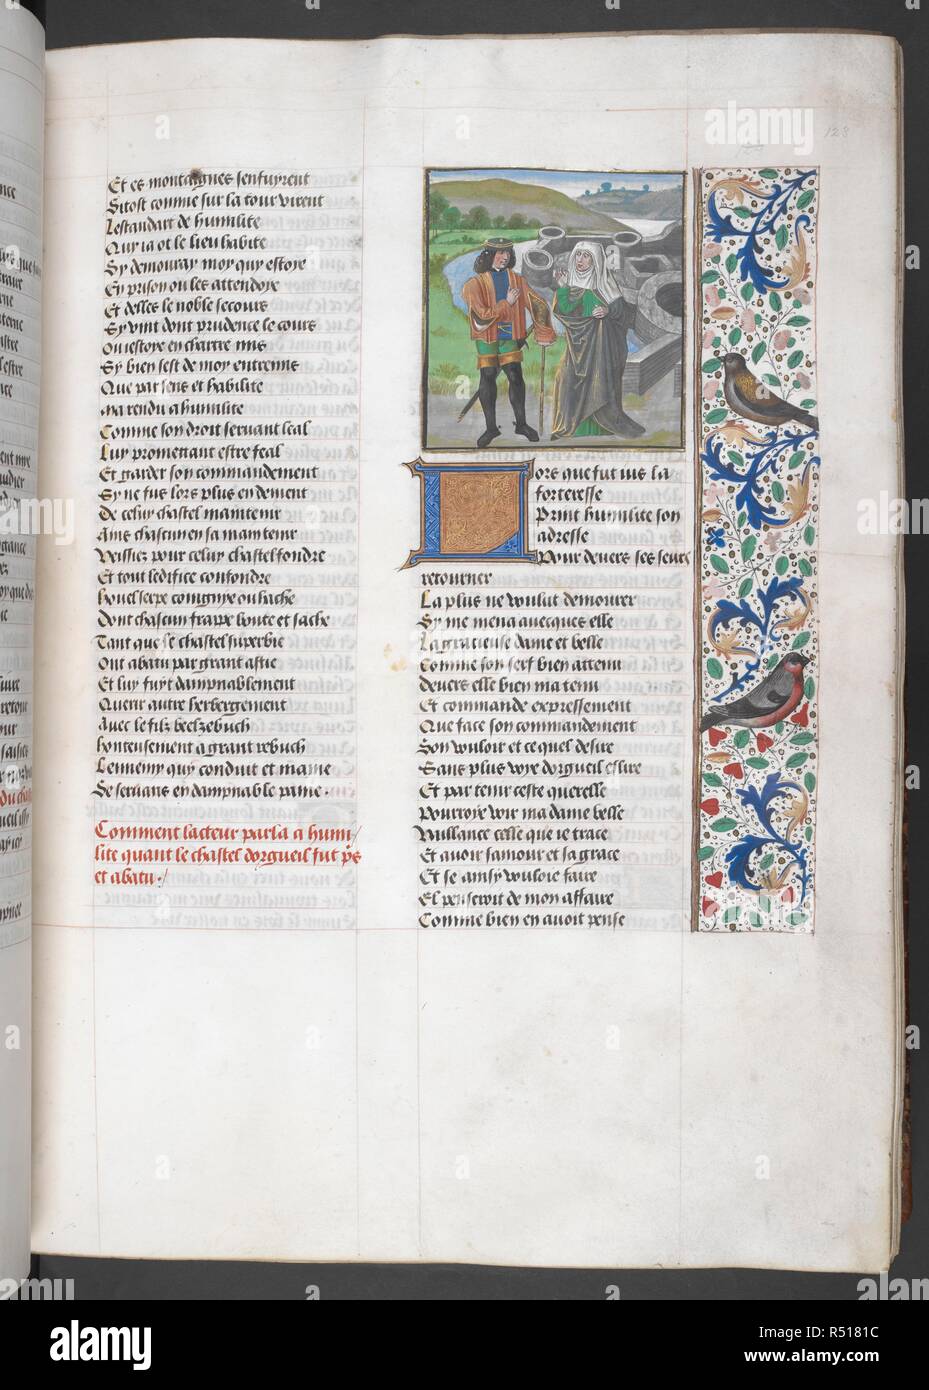 A miniature of the author, Jean de Courcy, and Humility with the ruins of the Castle of Pride, following a rubric, 'Comment l'acteur parla a humilite quant le chastel d'orgueil fut pris et abatu'. Le chemin de Vaillance, and other texts. Netherlands, S. (Bruges); last quarter of the 15th century, before 1483. Source: Royal 14 E. II, f.123. Language: French. Stock Photo